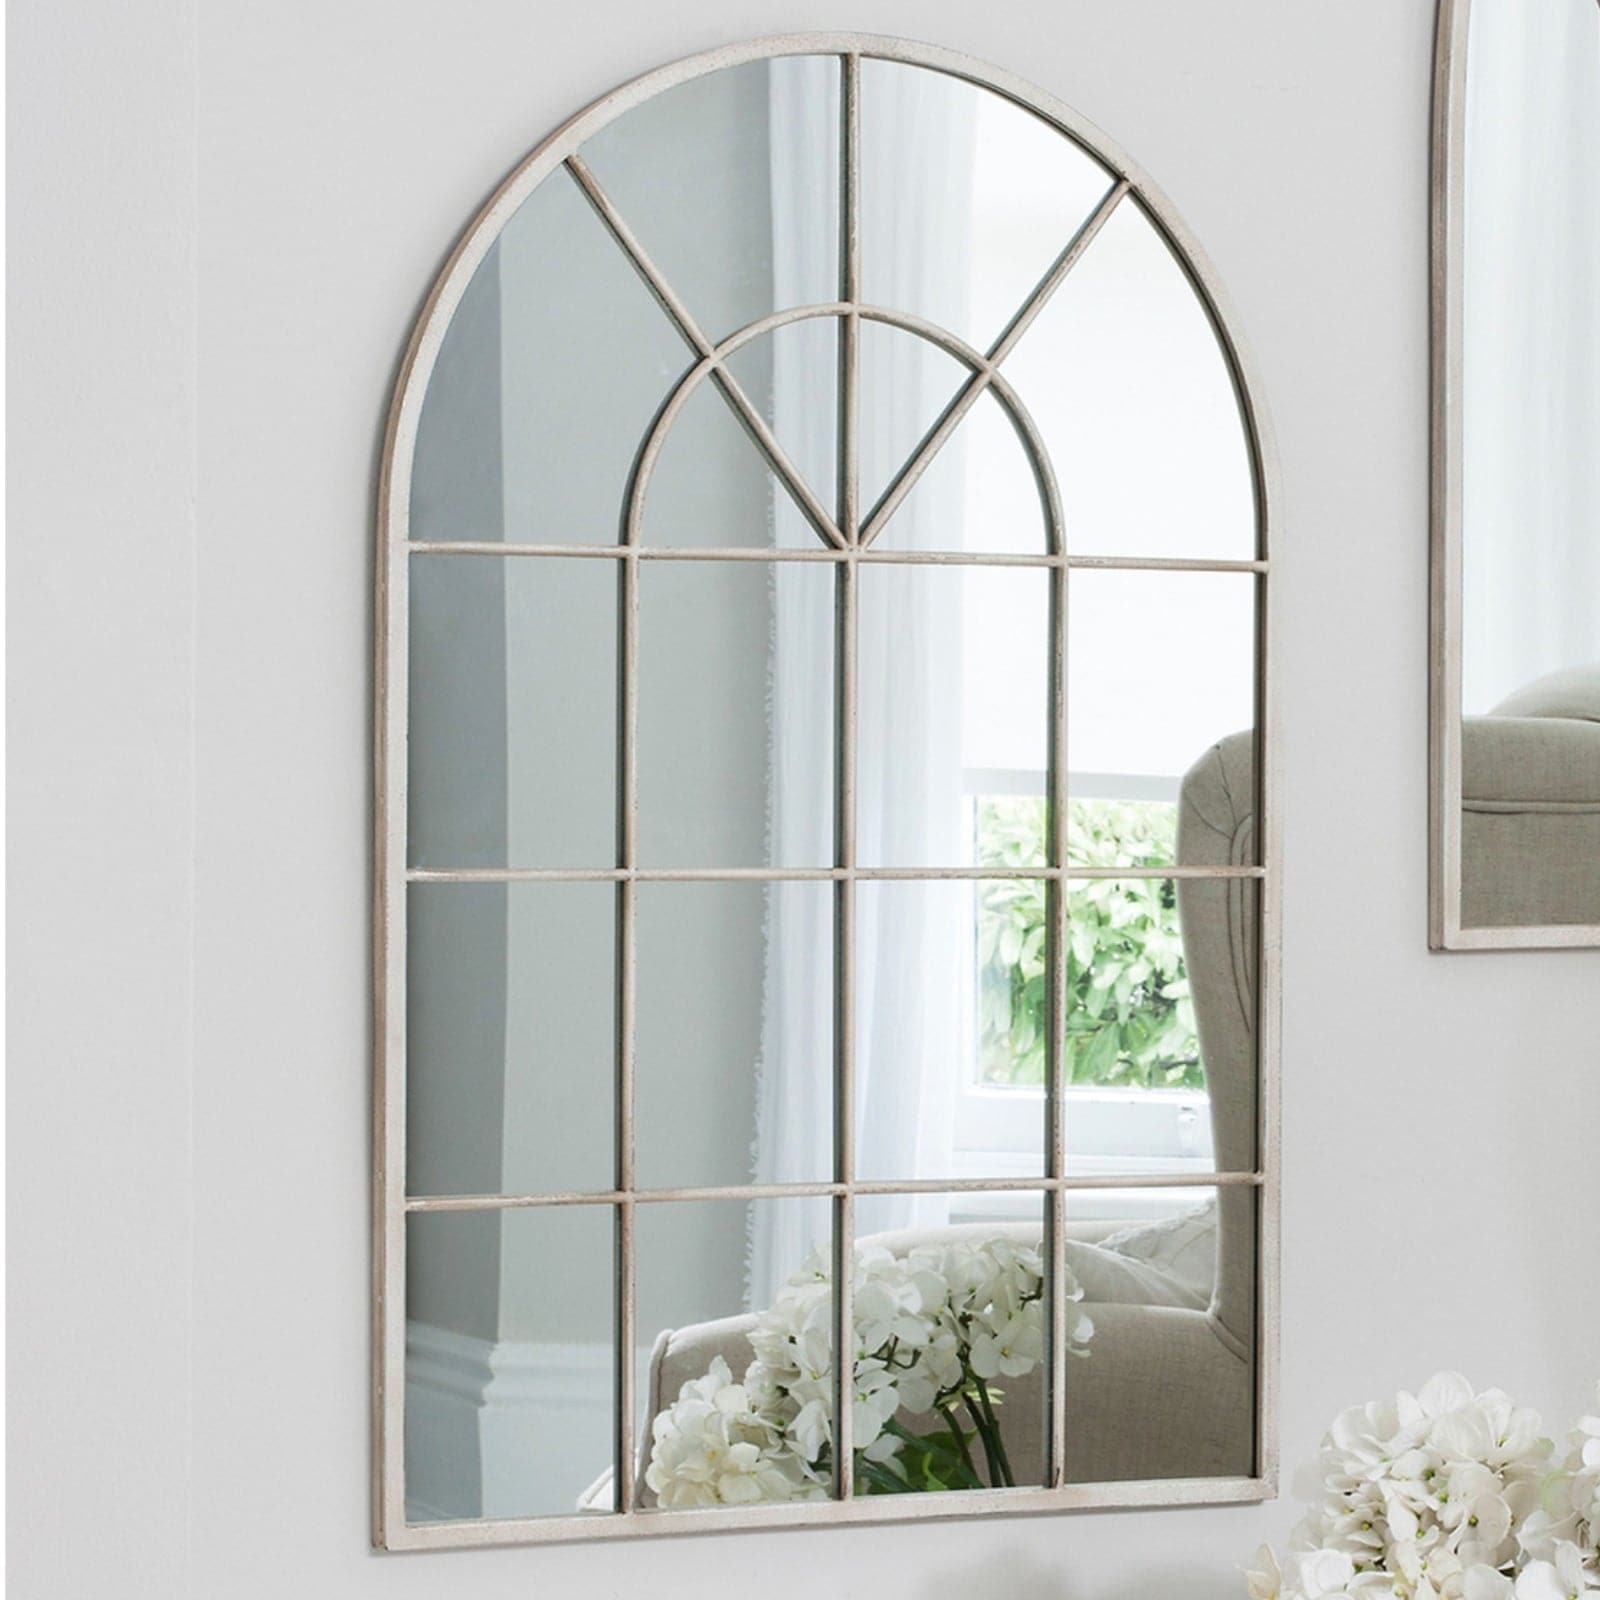 Distressed Cream Arched Top Window Mirror - The Farthing